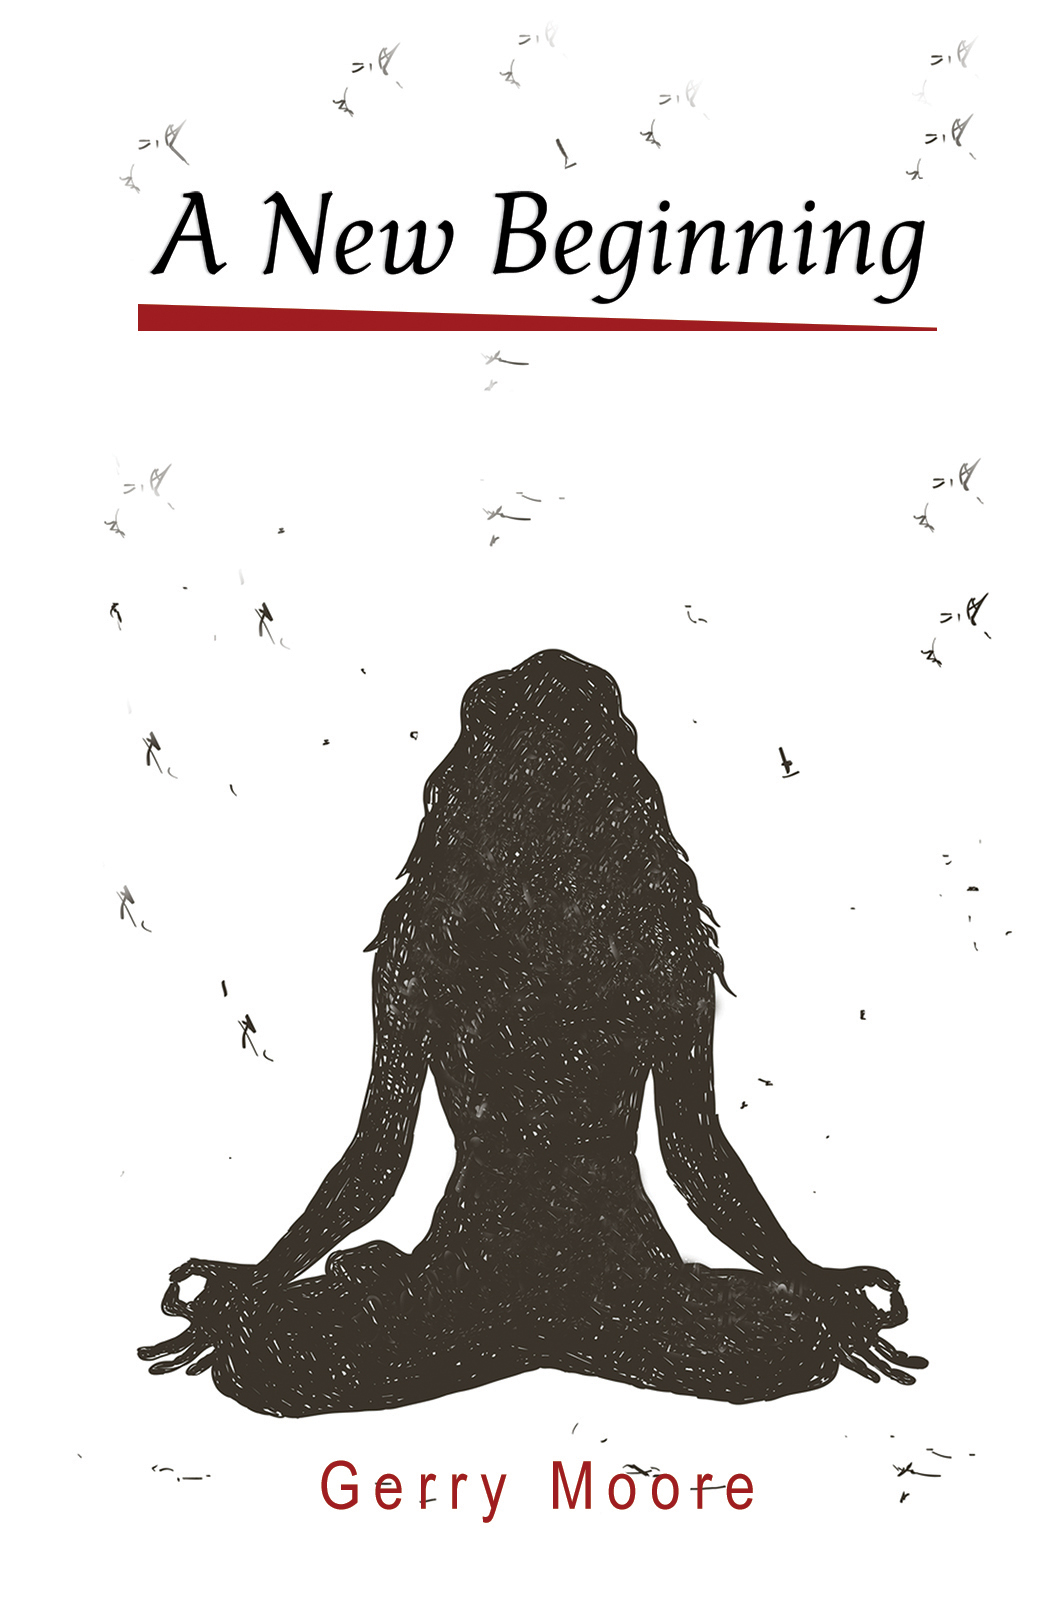 This image is the cover for the book A New Beginning